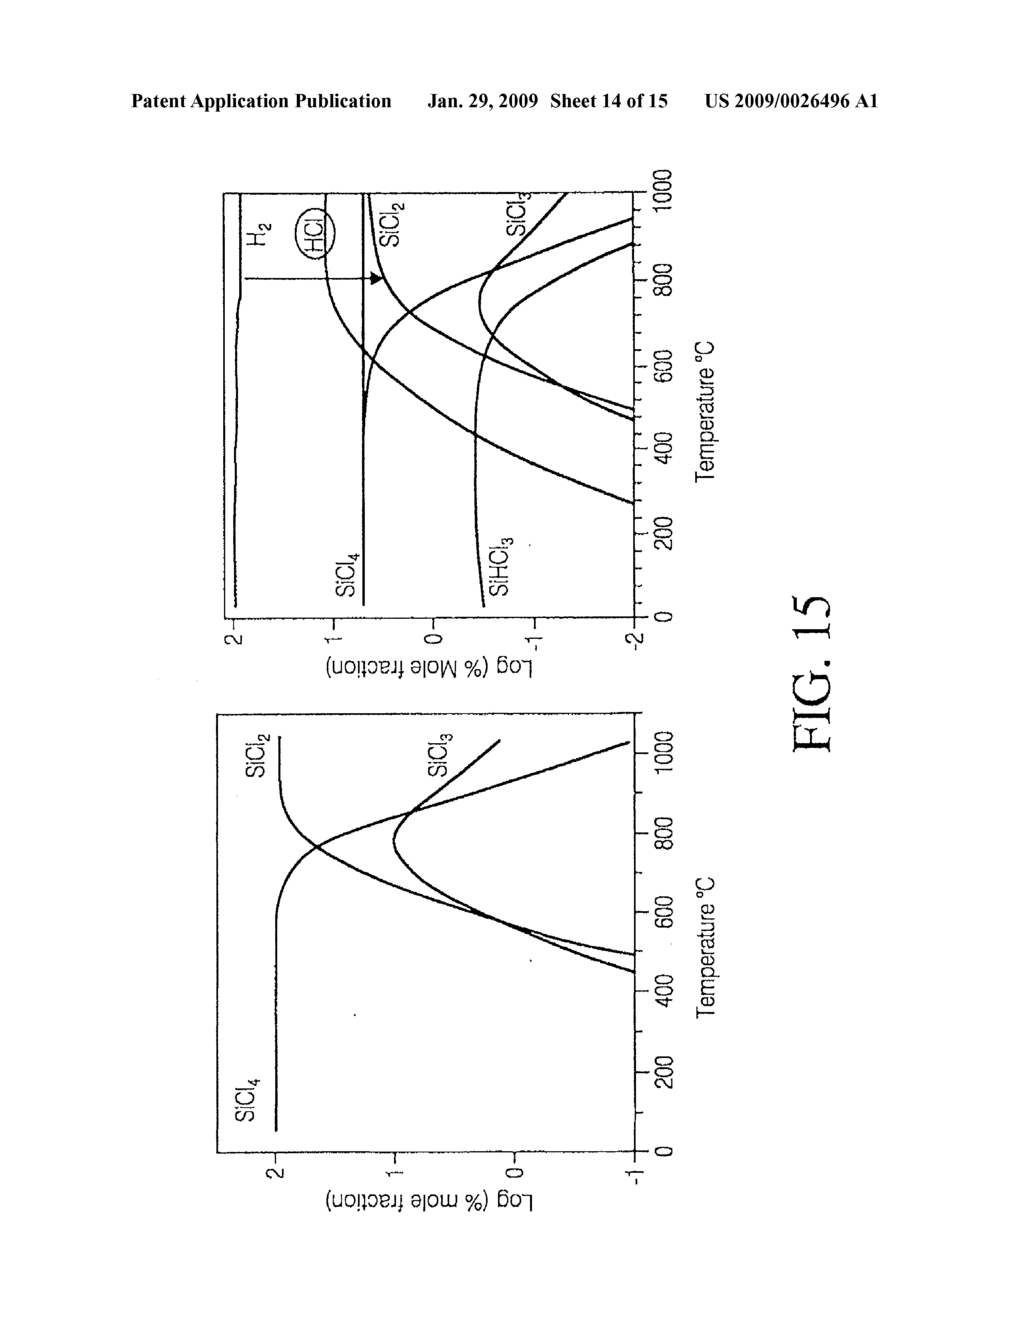 METHODS OF MAKING SUBSTITUTIONALLY CARBON-DOPED CRYSTALLINE SI-CONTAINING MATERIALS BY CHEMICAL VAPOR DEPOSITION - diagram, schematic, and image 15